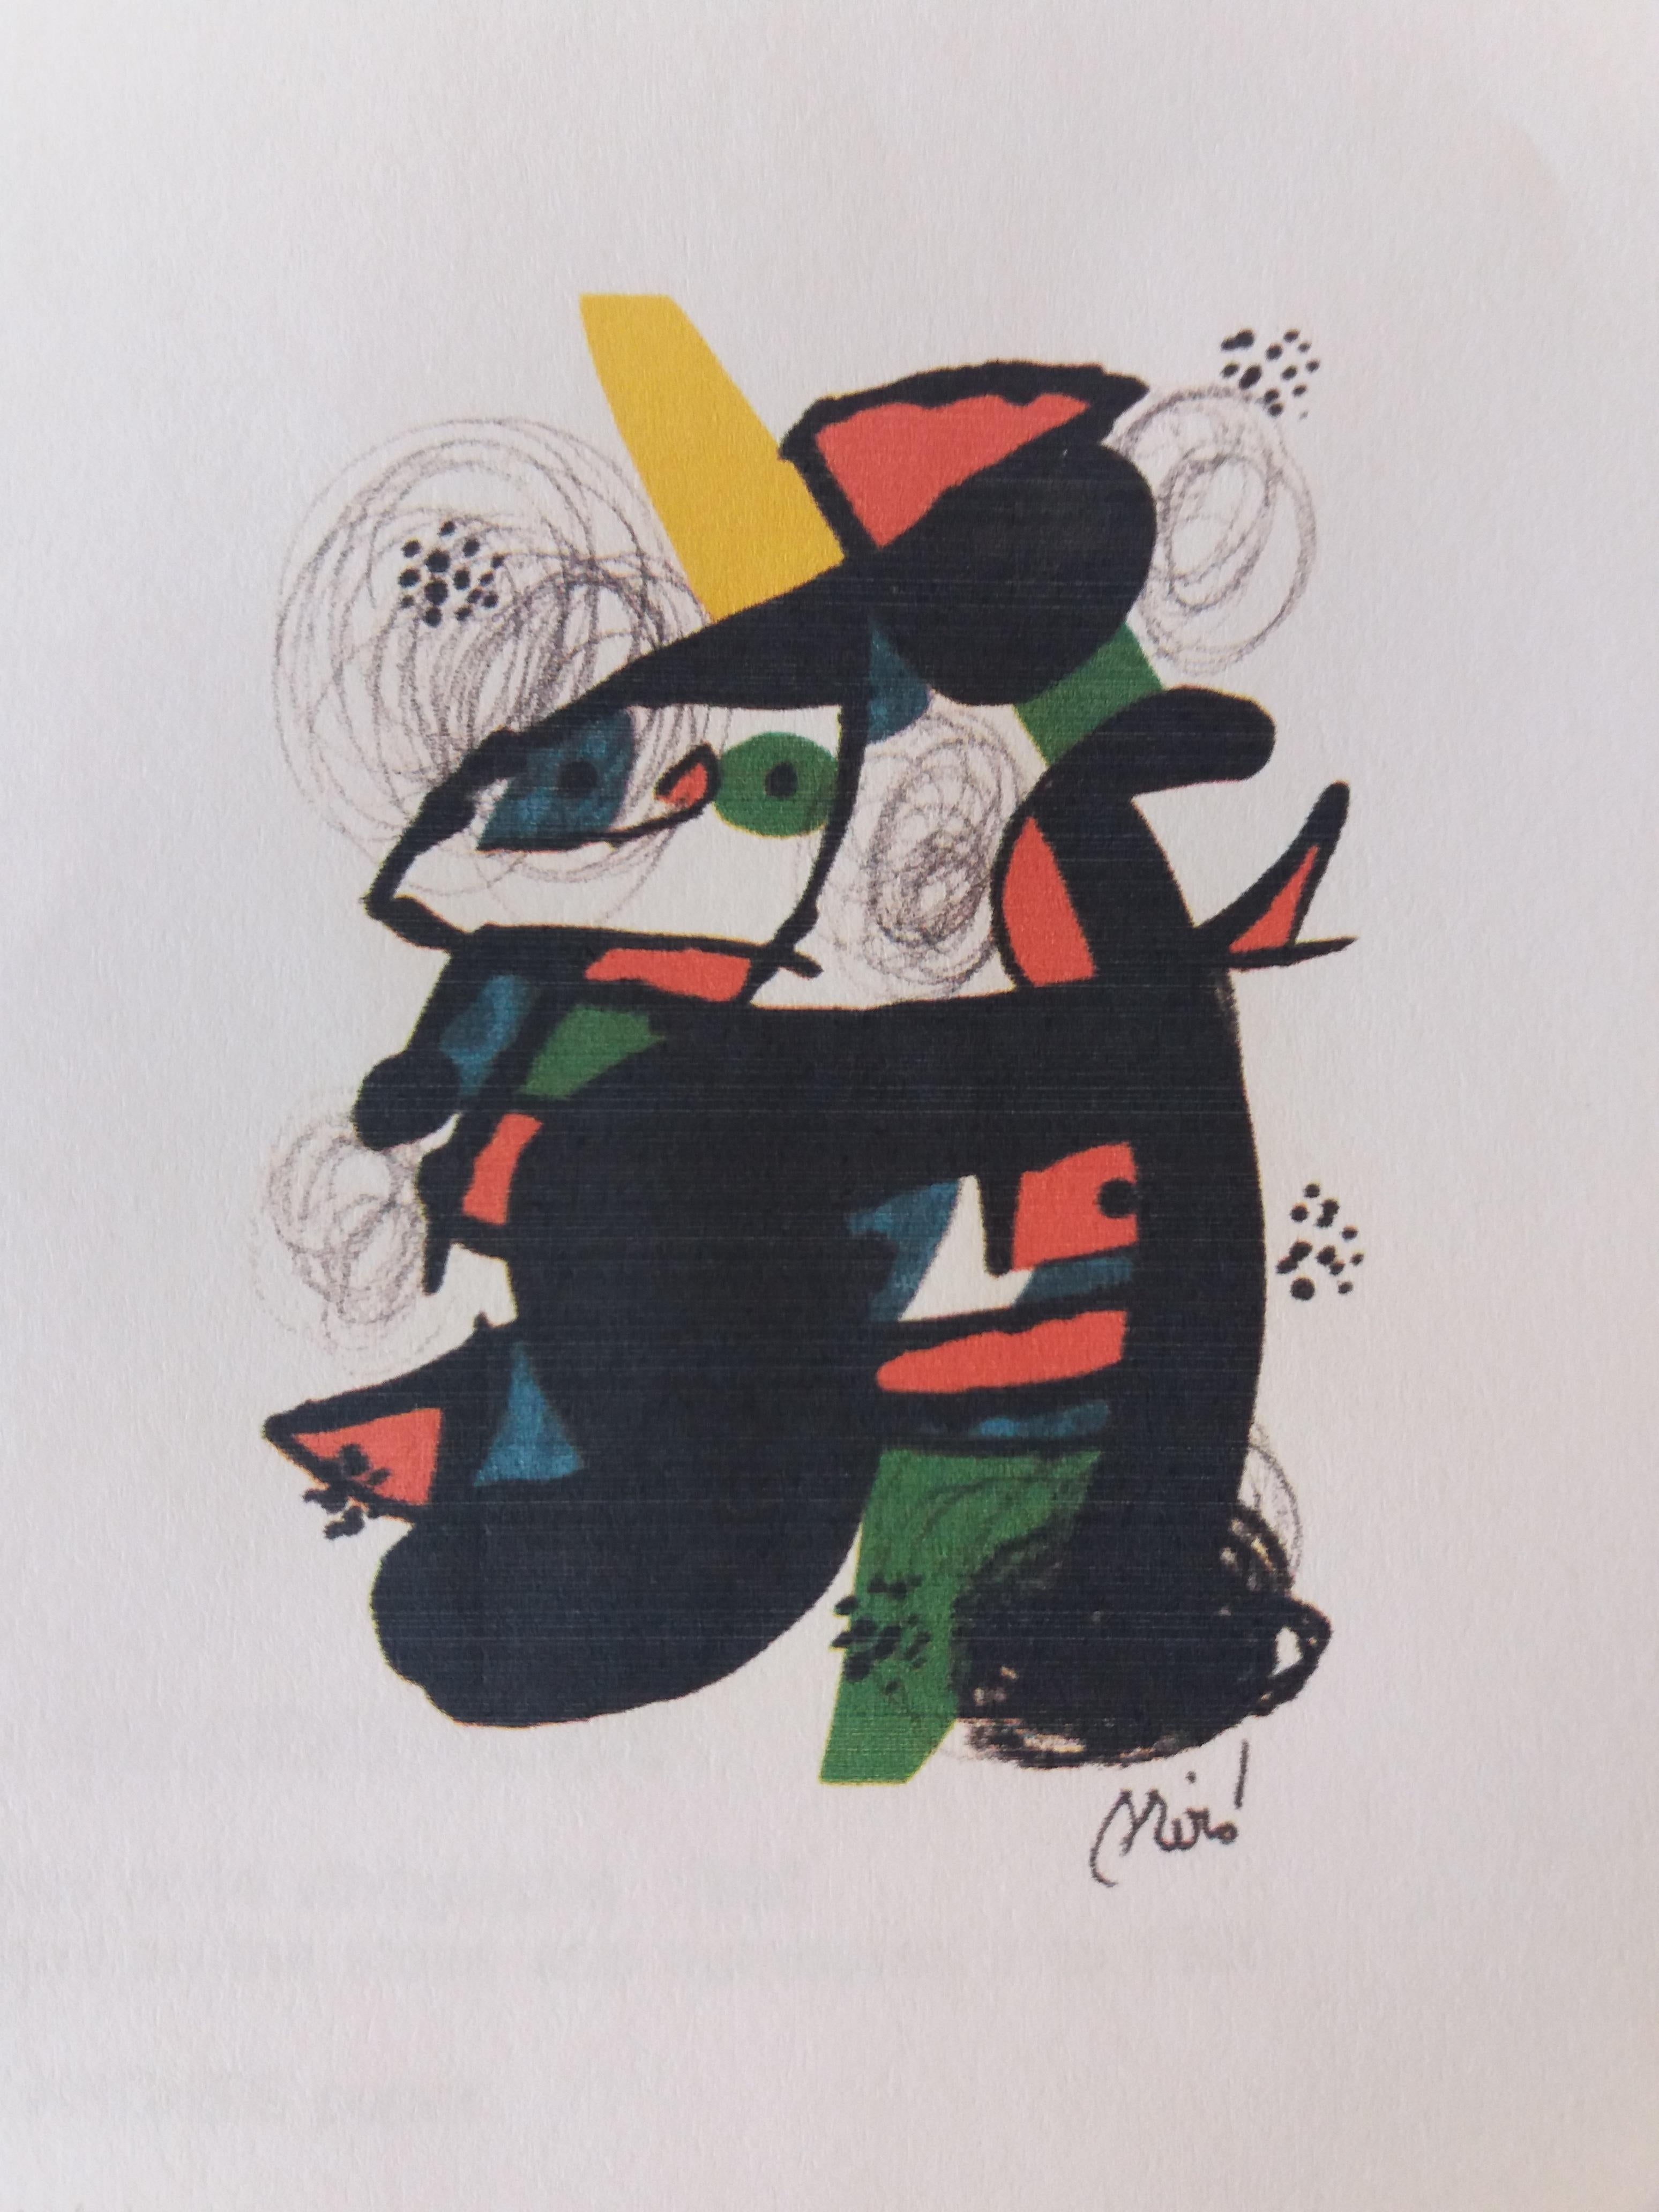 Joan Miró Abstract Print - 5 melodie acide. original lithograph painting